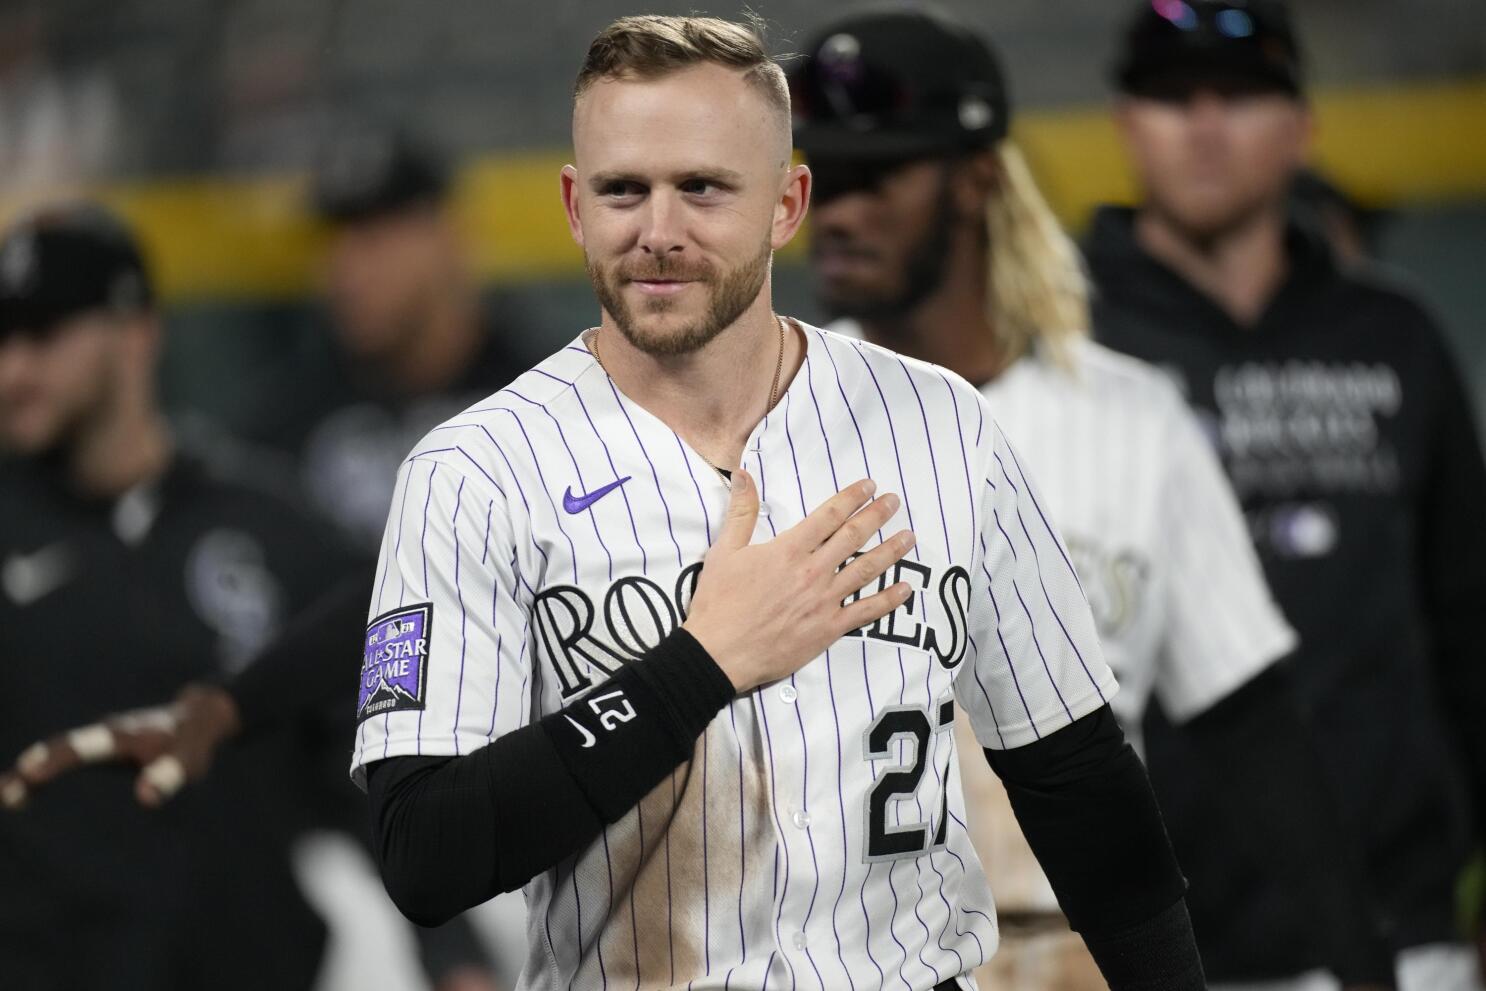 Colorado Rockies: Who should be an All-Star for the Rox?